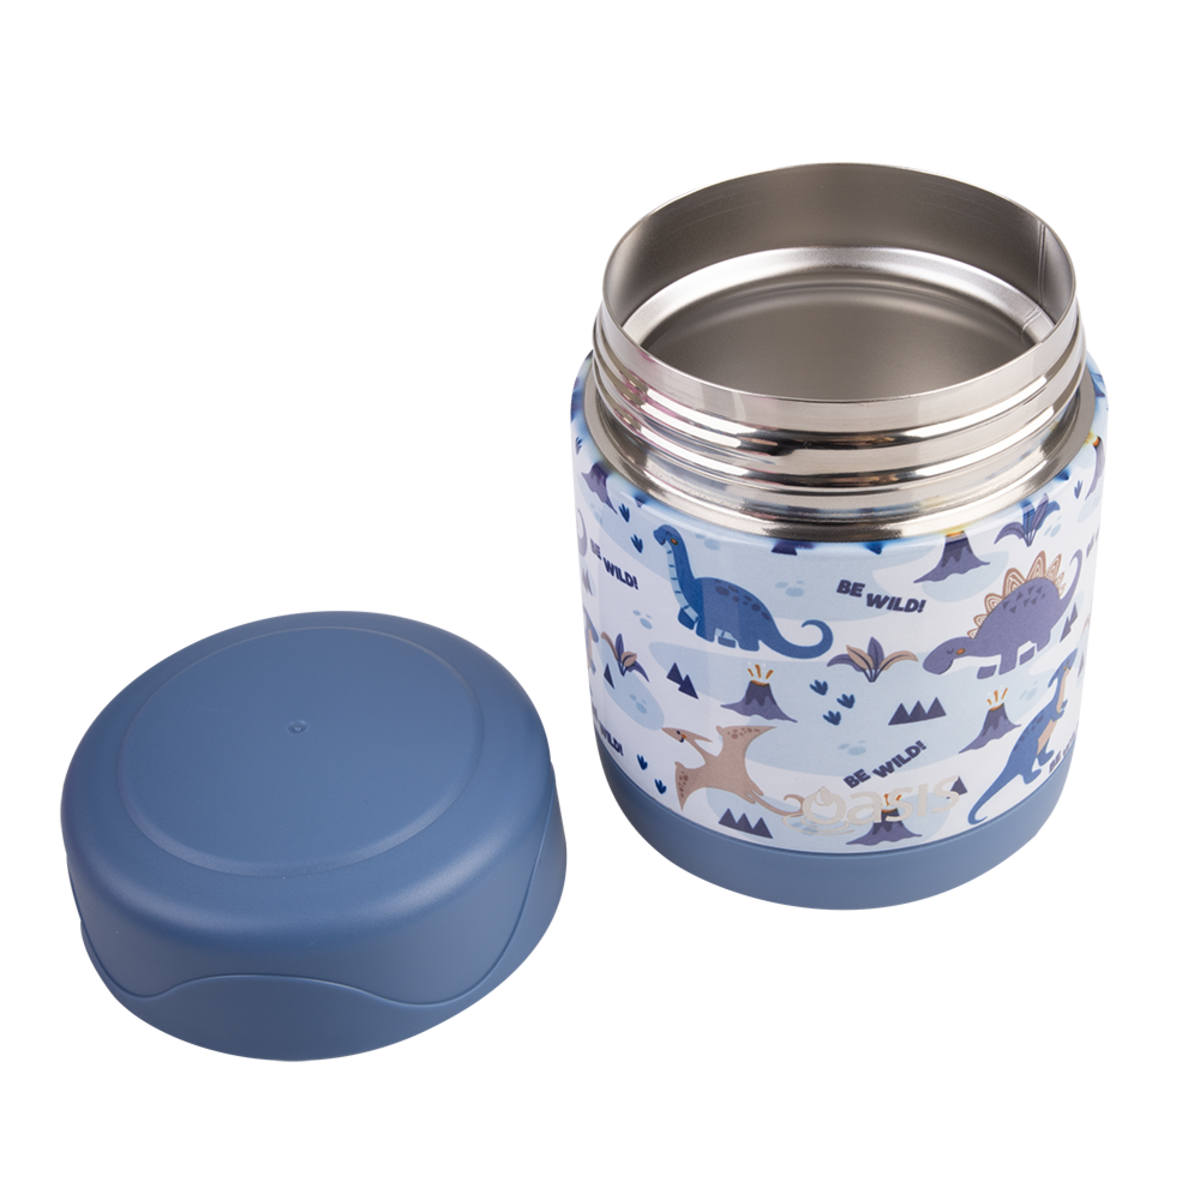 OASIS STAINLESS STEEL DOUBLE WALL INSULATED KID'S FOOD FLASK 300ML -DINOSAUR